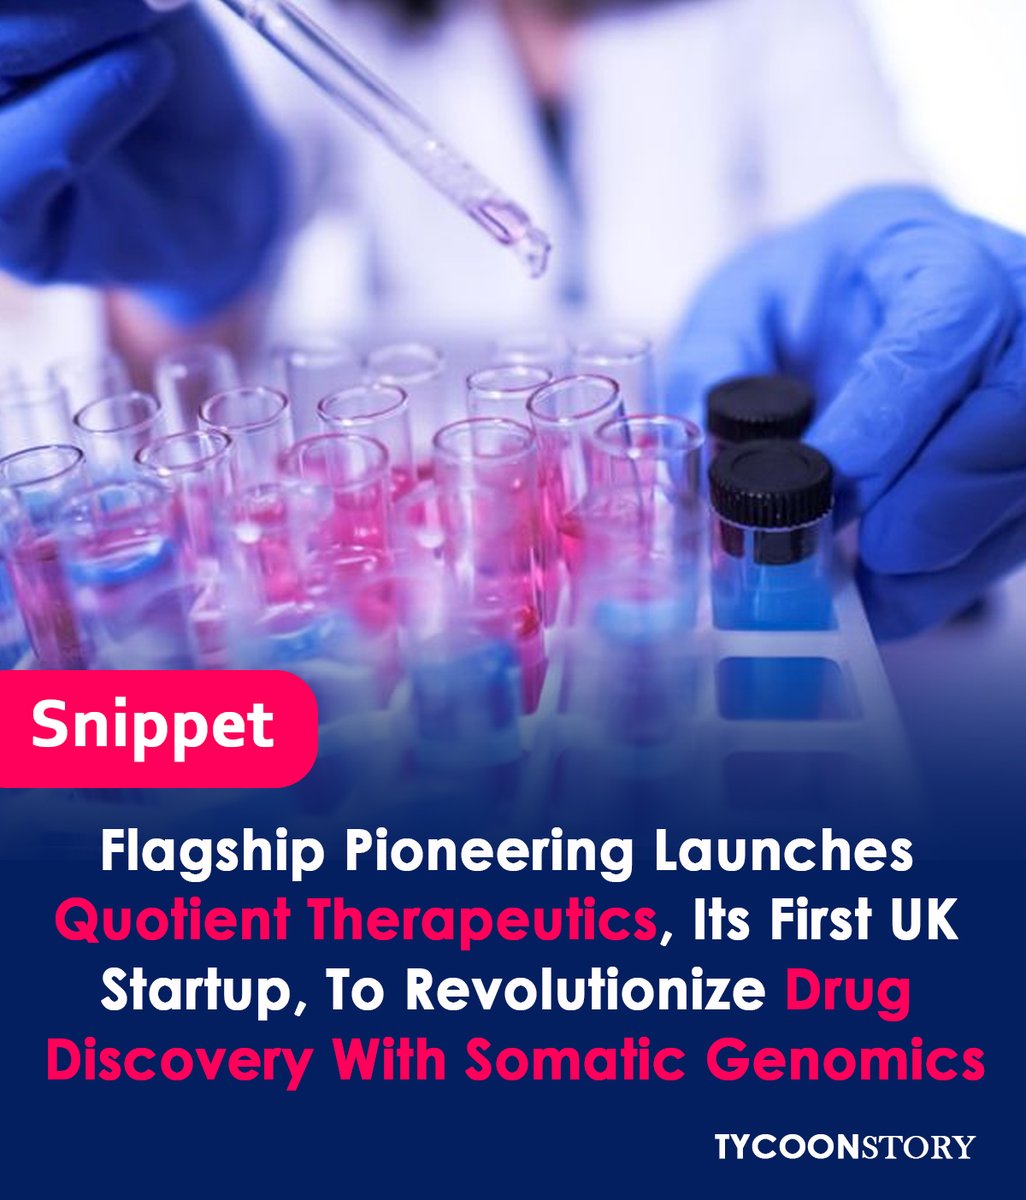 Quotient Therapeutics, a pioneering Flagship Pioneering startup, aims to revolutionize drug discovery using somatic genomics
#FlagshipPioneering #QuotientTherapeutics #UKstartup #geneticvariation #drugdiscovery #newtherapies #biotechnology #innovation #healthcare @QuotientTx